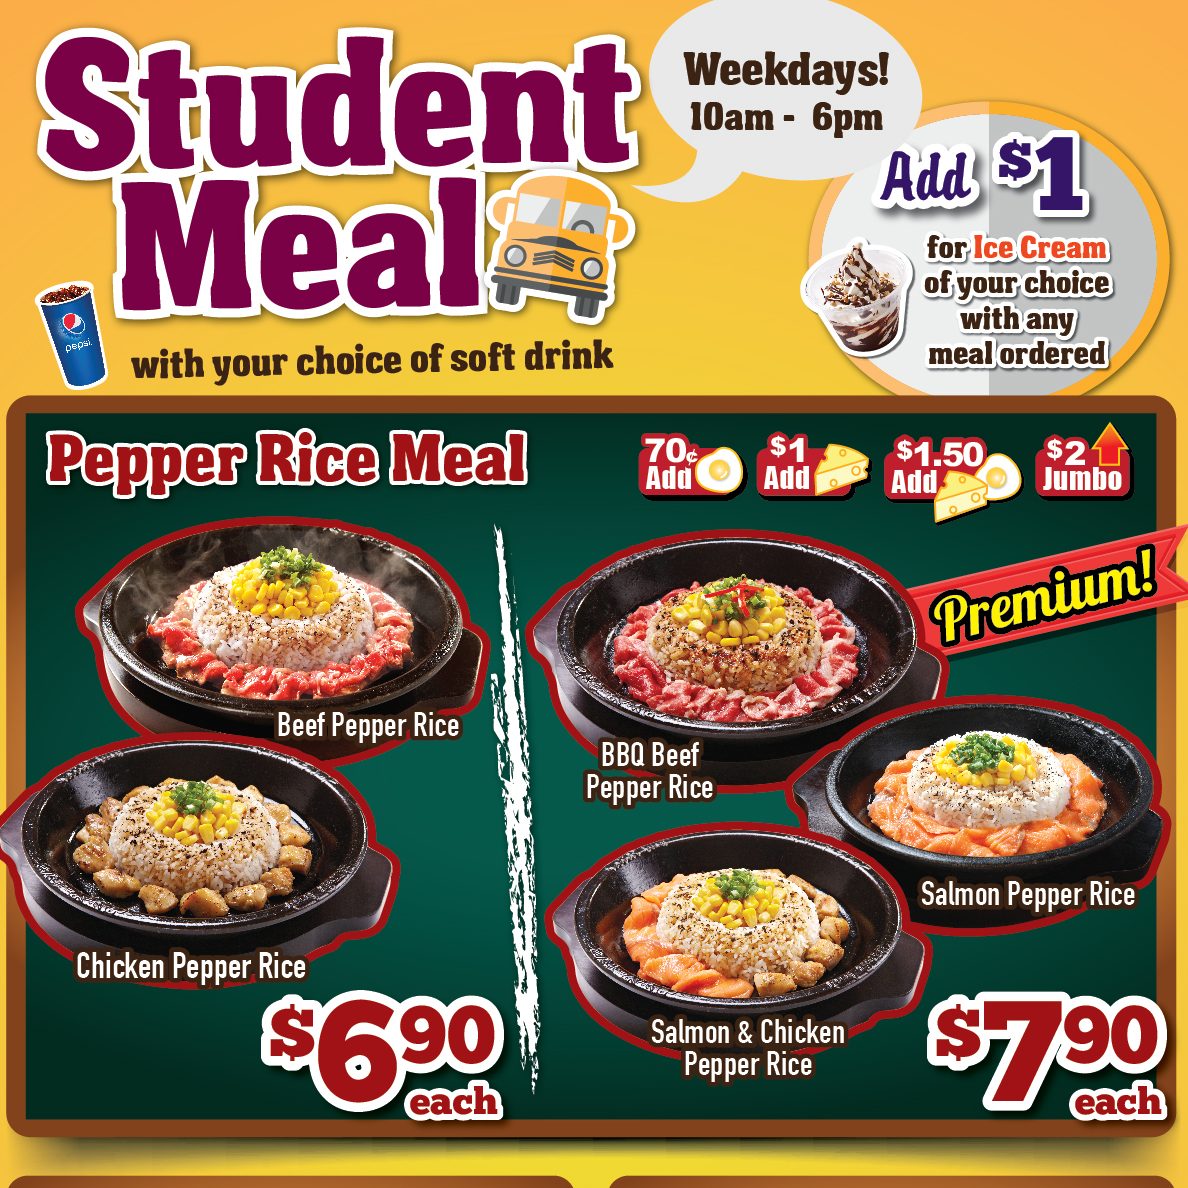 Pepper Lunch Student Meal from $6.90 only ends 30 Sep 2016